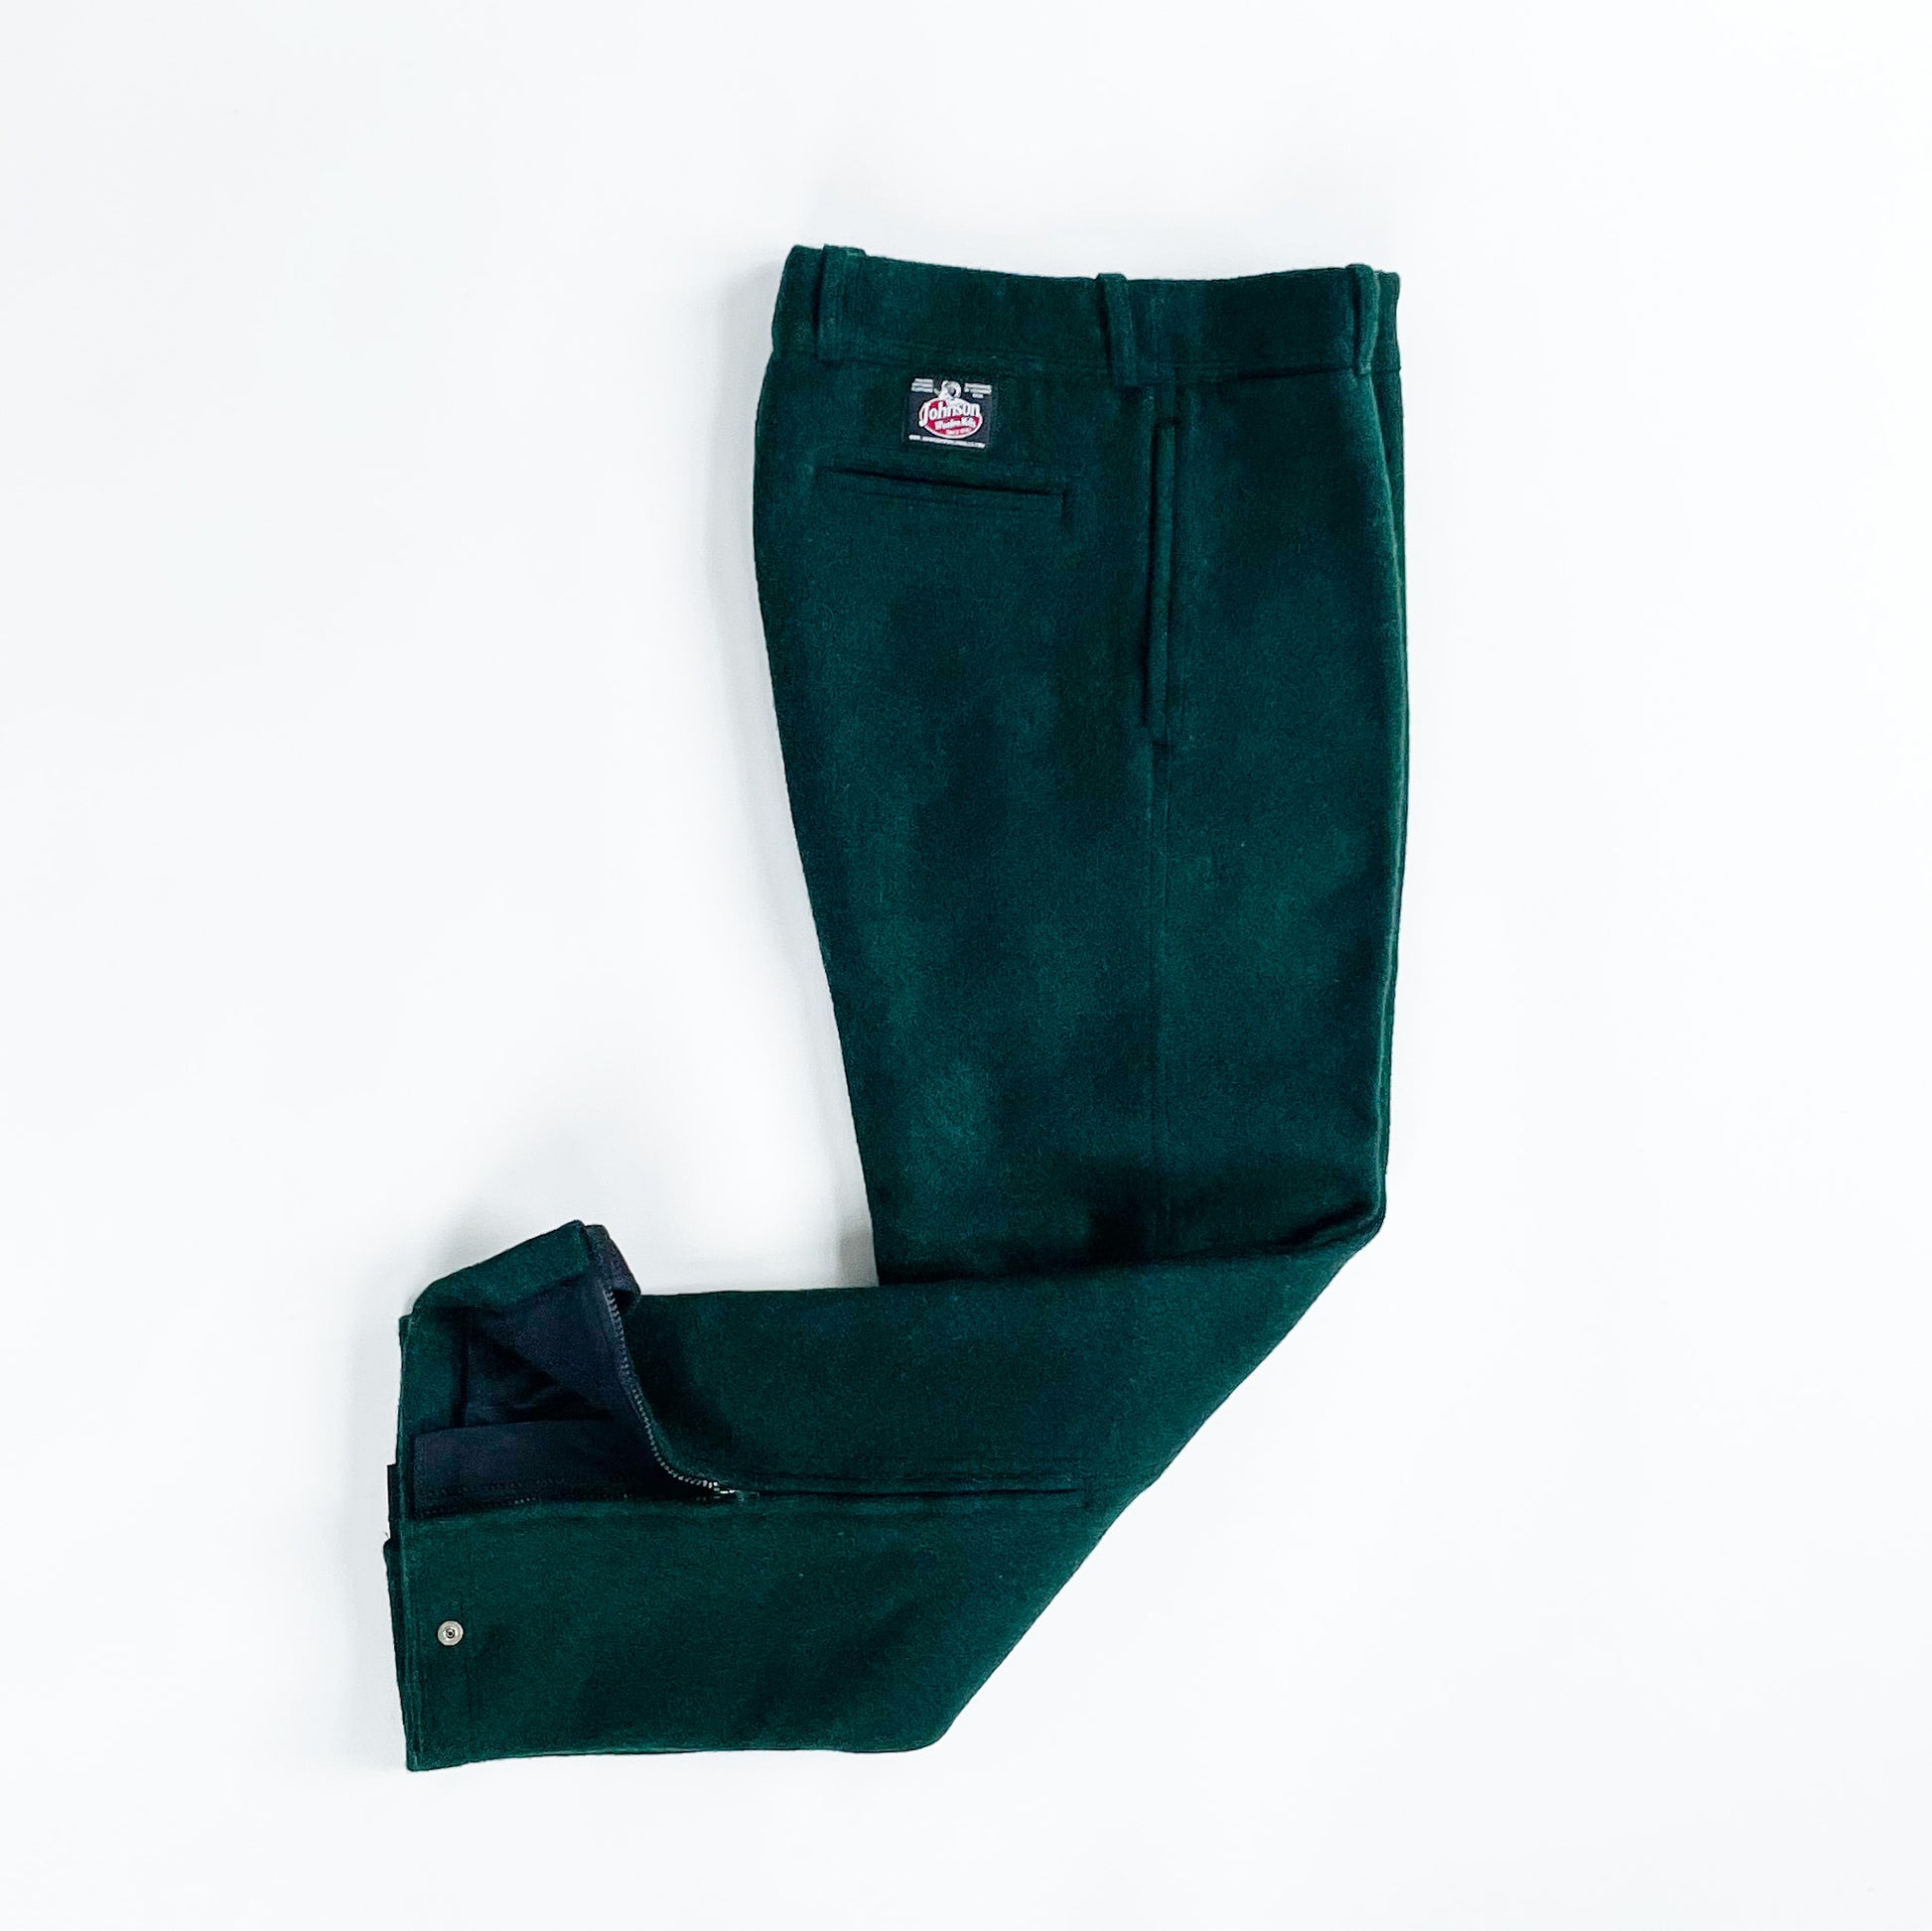 Zip Pants Spruce Green Microtherm Lined 15 inch side zipper on each leg side view with bottom opened